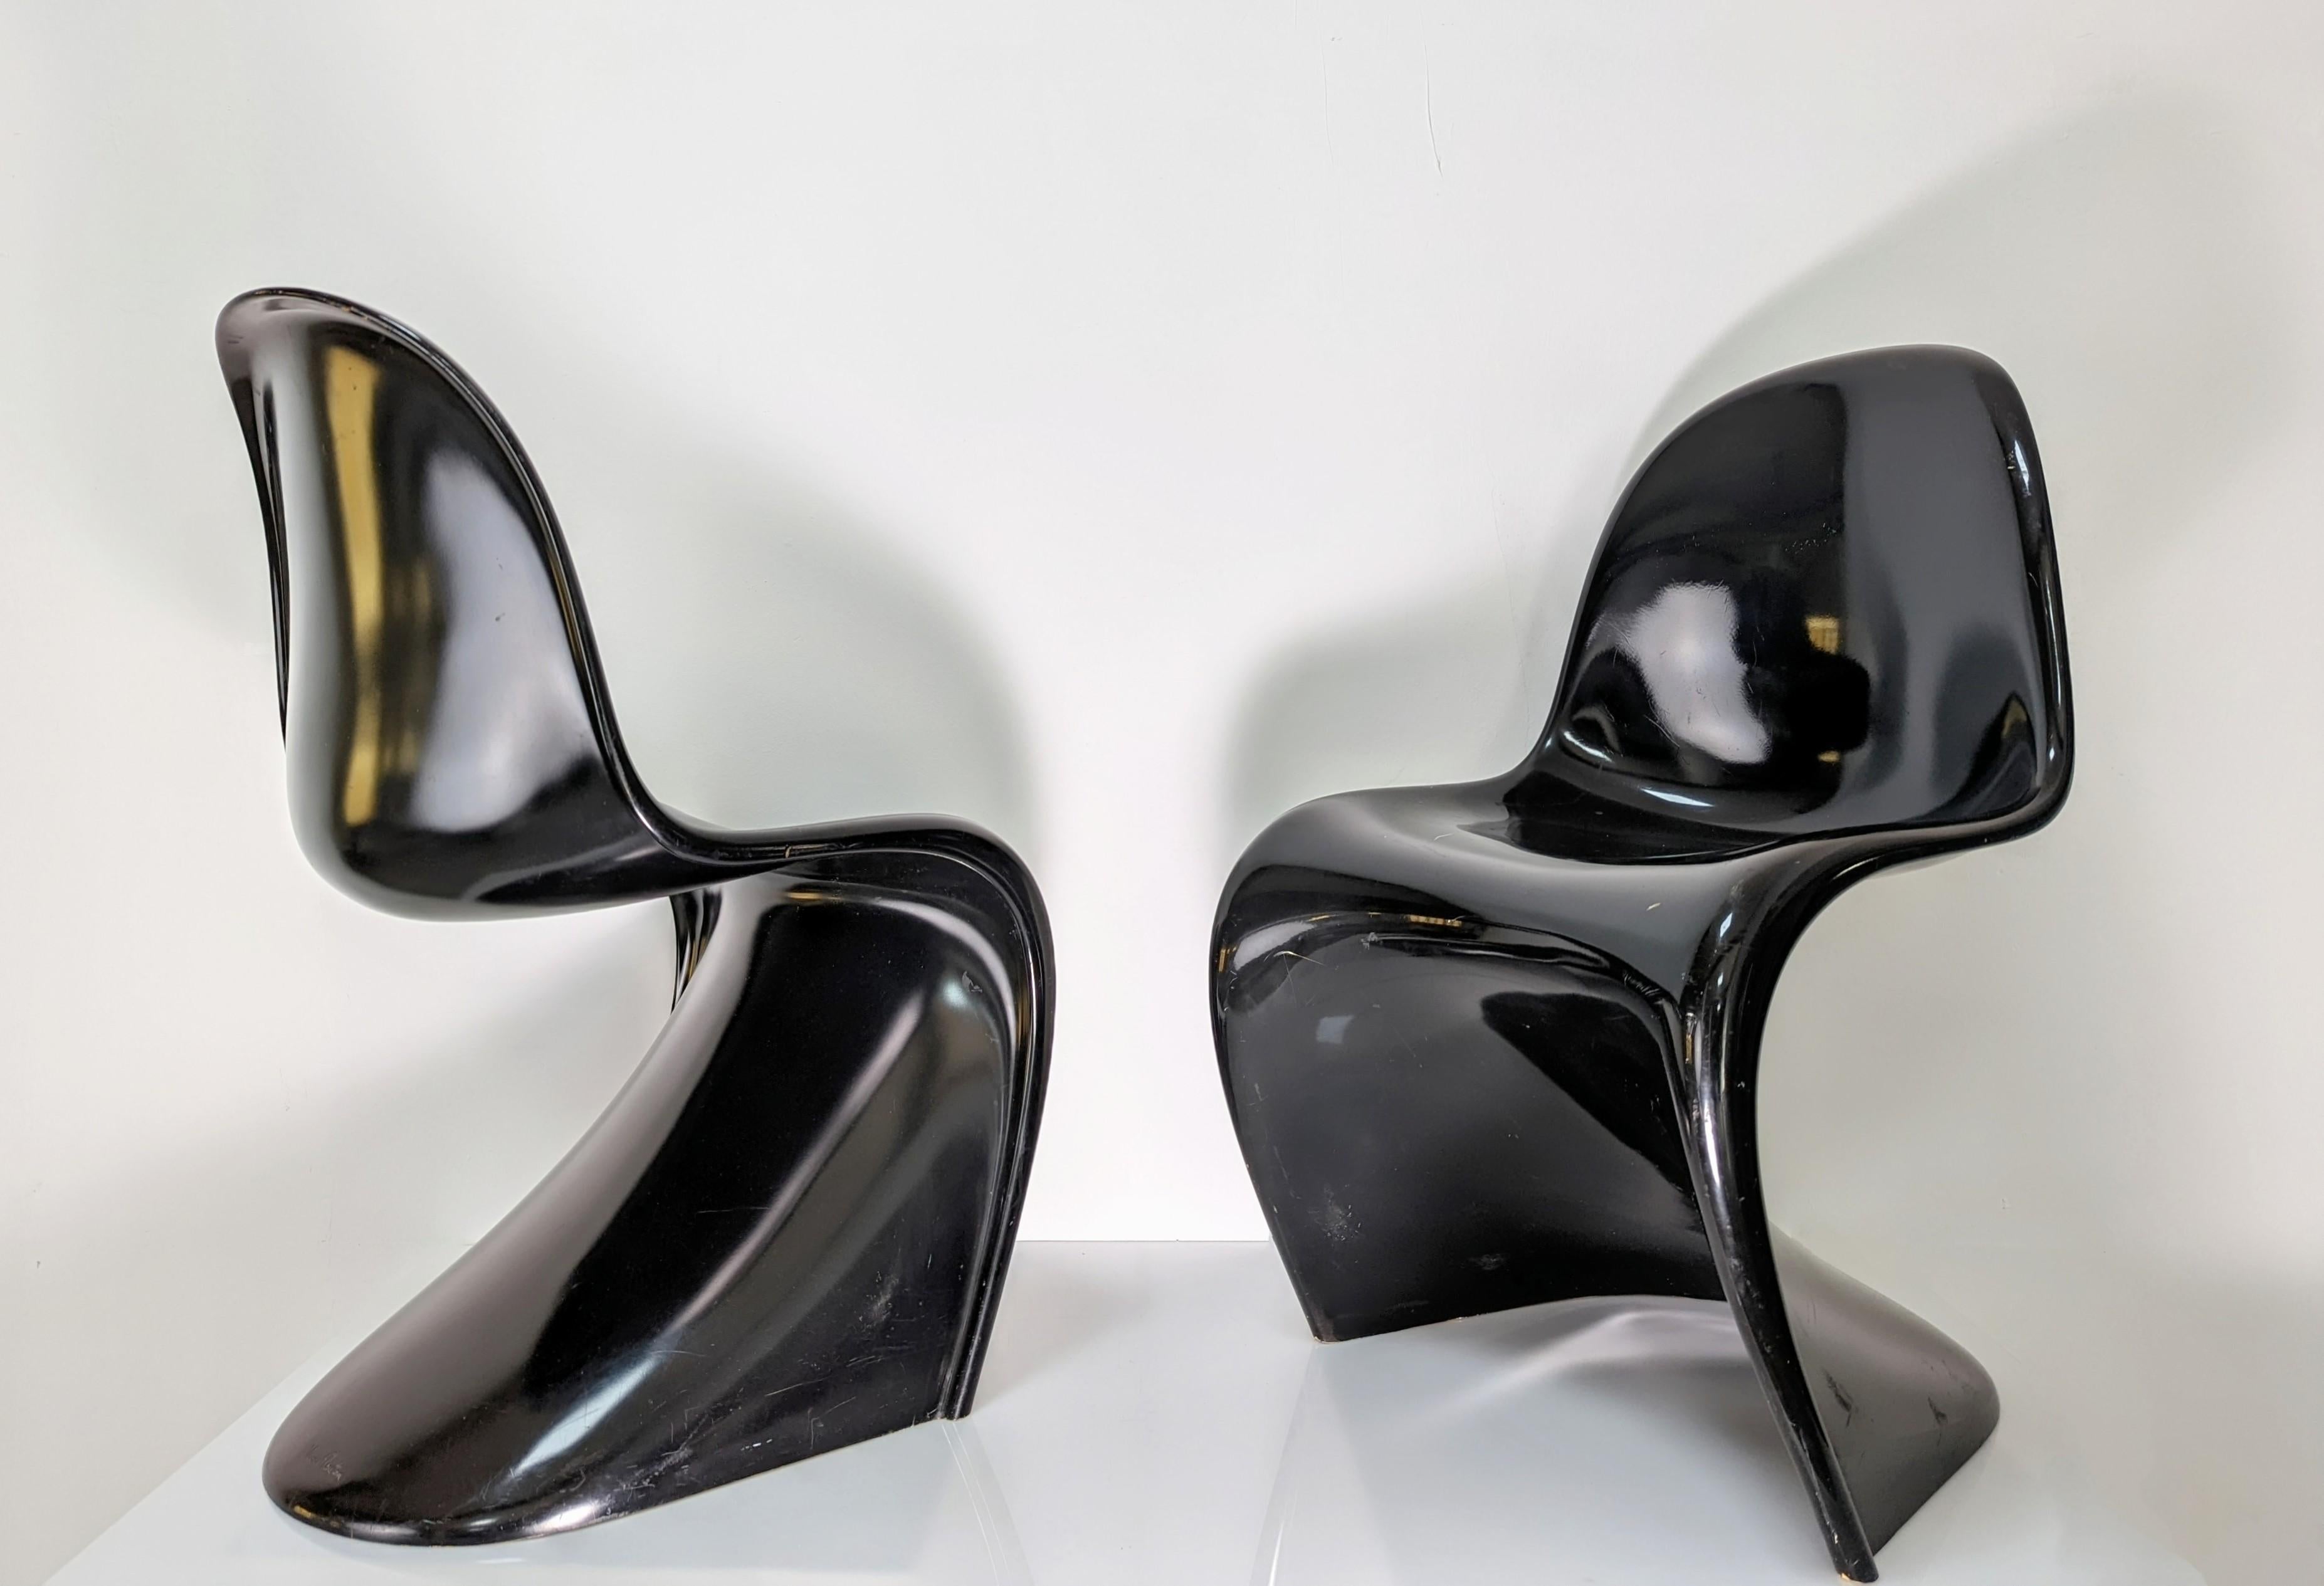 Fantastic pair of original chairs by the architect and designer, a symbol of 20th century design, Verner Panton. With this chair, he achieved the first one-piece cantilever chair. One of the first models is kept at the MoMA in New York.